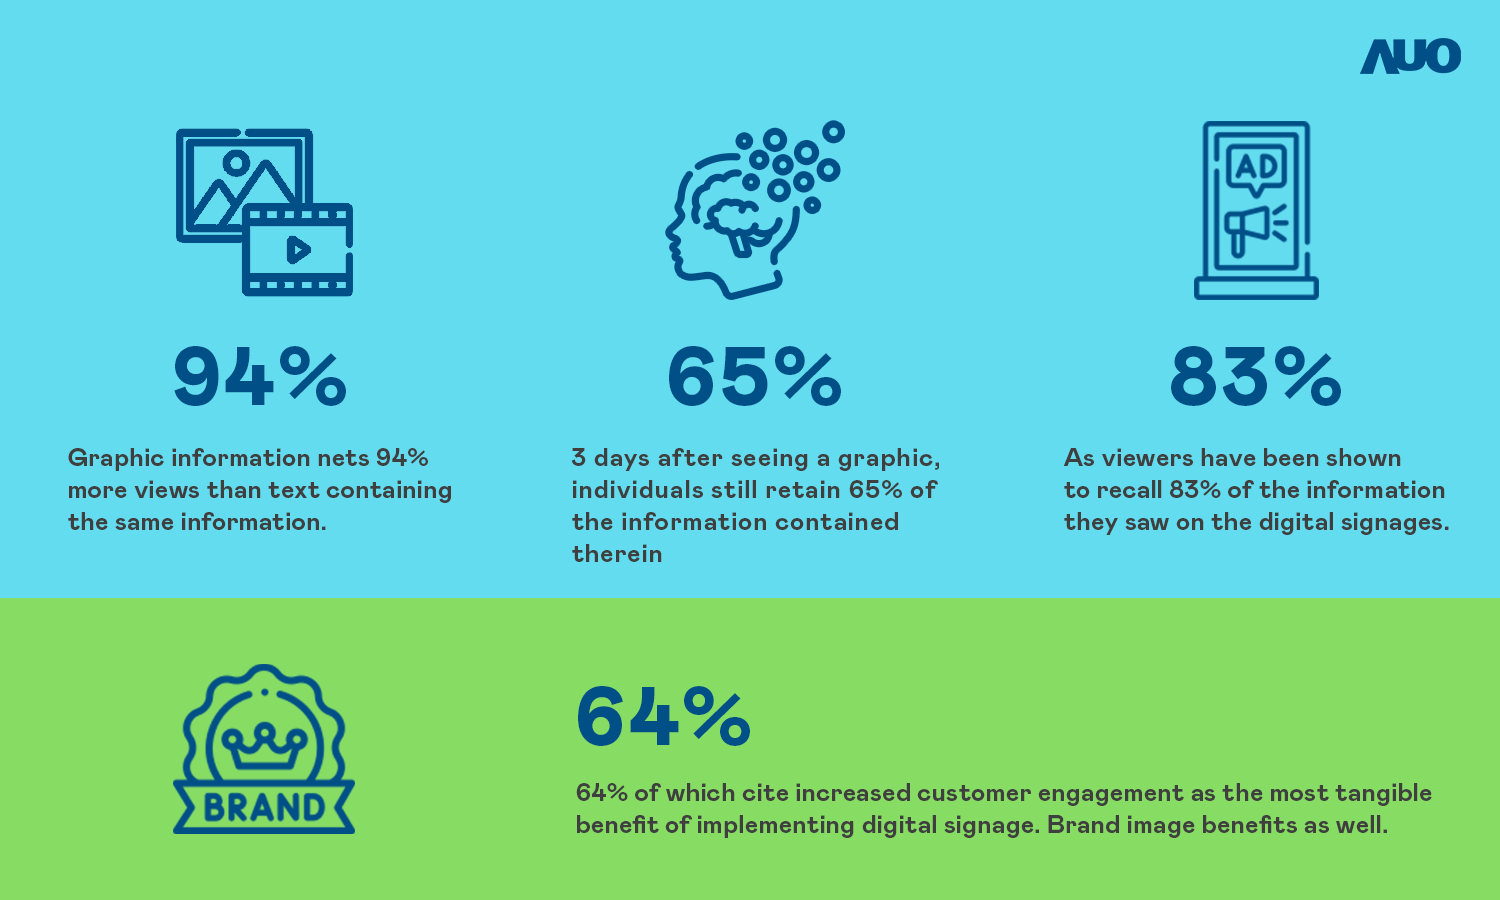 These statistics are backed by the experiences of tech-savvy retailers, 64% of which cite increased customer engagement as the most tangible benefit of implementing digital signage. Brand image benefits as well: 84% of UK retailers feel that digital signage boosts brand awareness.